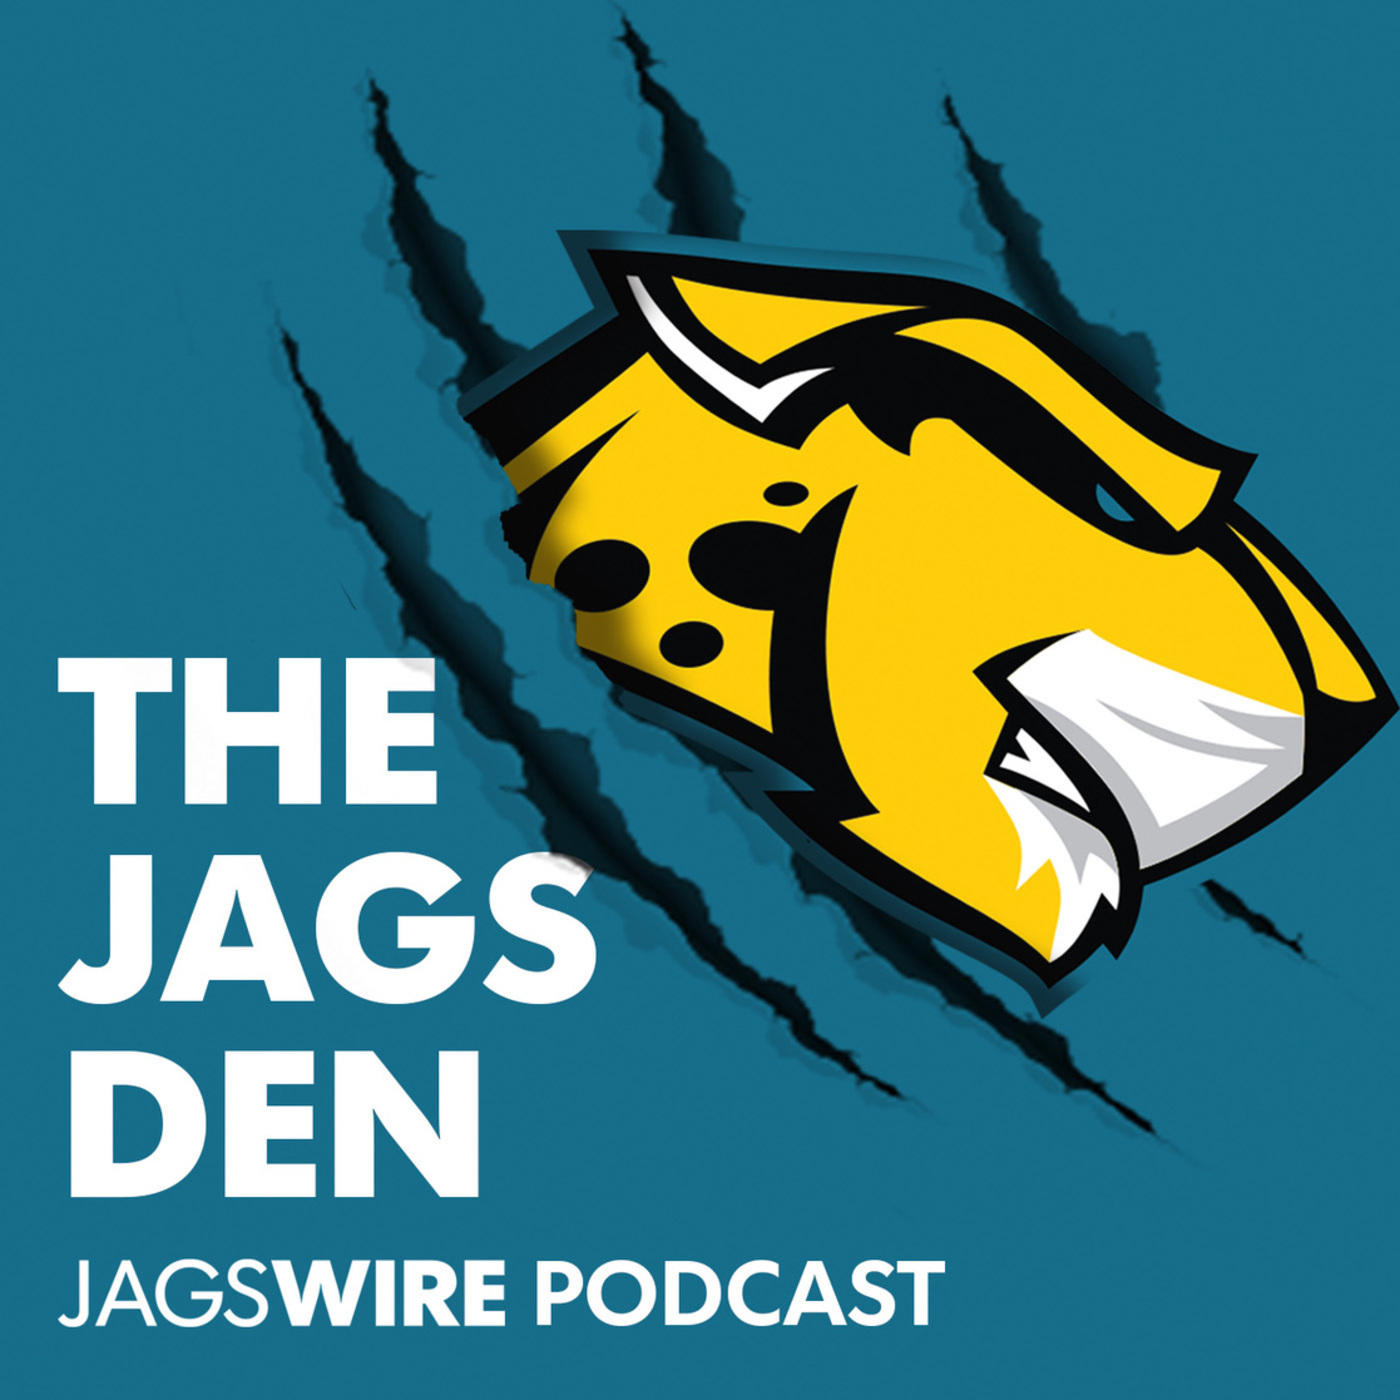 Jags Den Podcast Ep. 36: Discussions on Lambo's extension, when to release Blake Bortles and Josh Rosen potentially joining the Jags